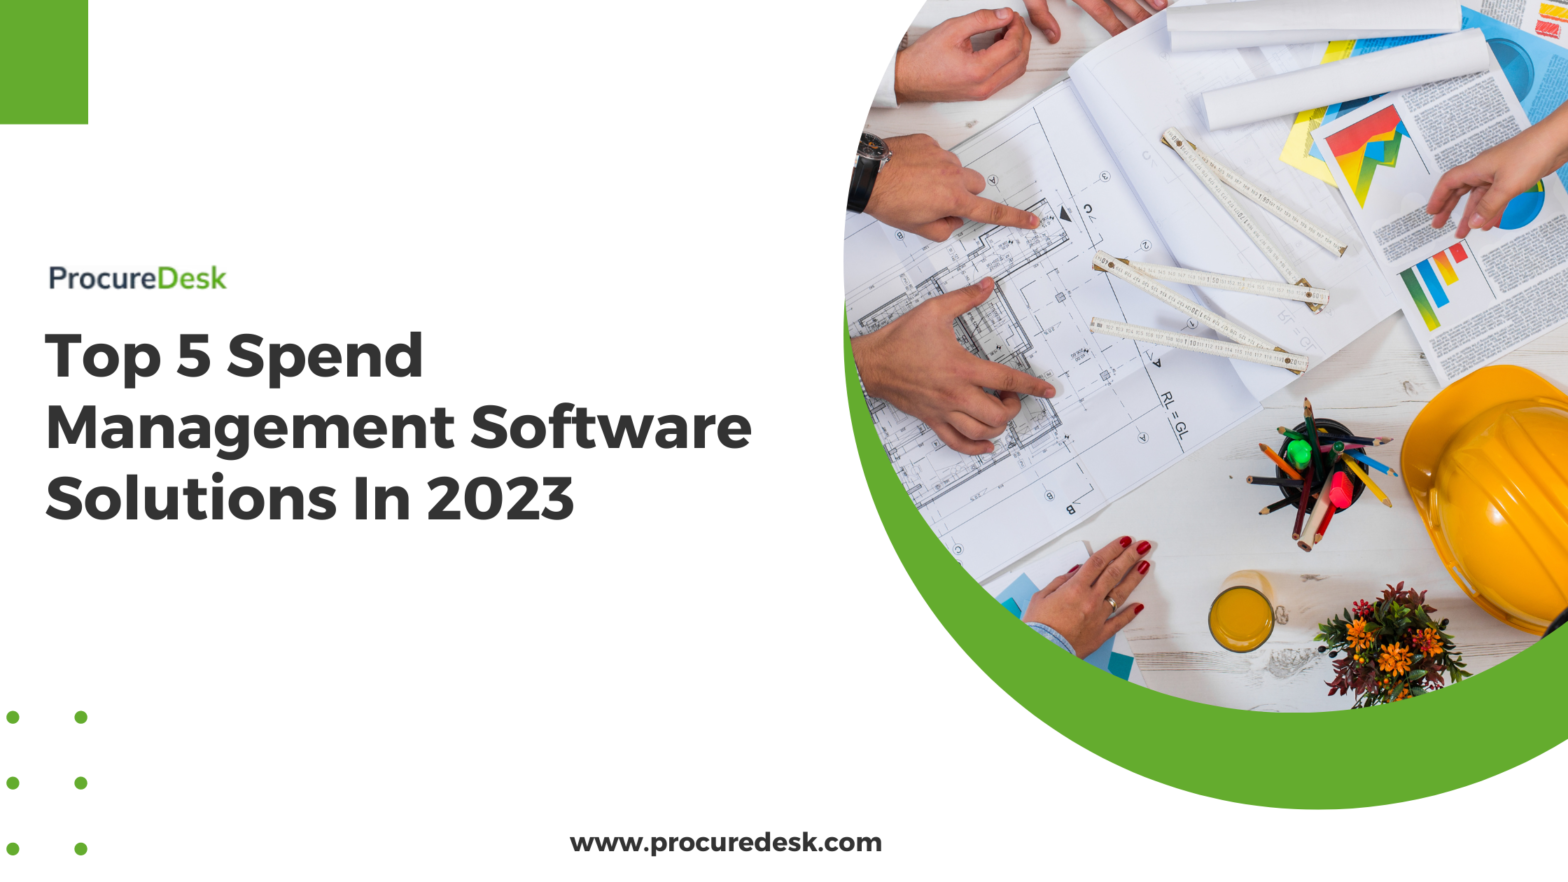 Top 5 Spend Management Software Solutions In 2023